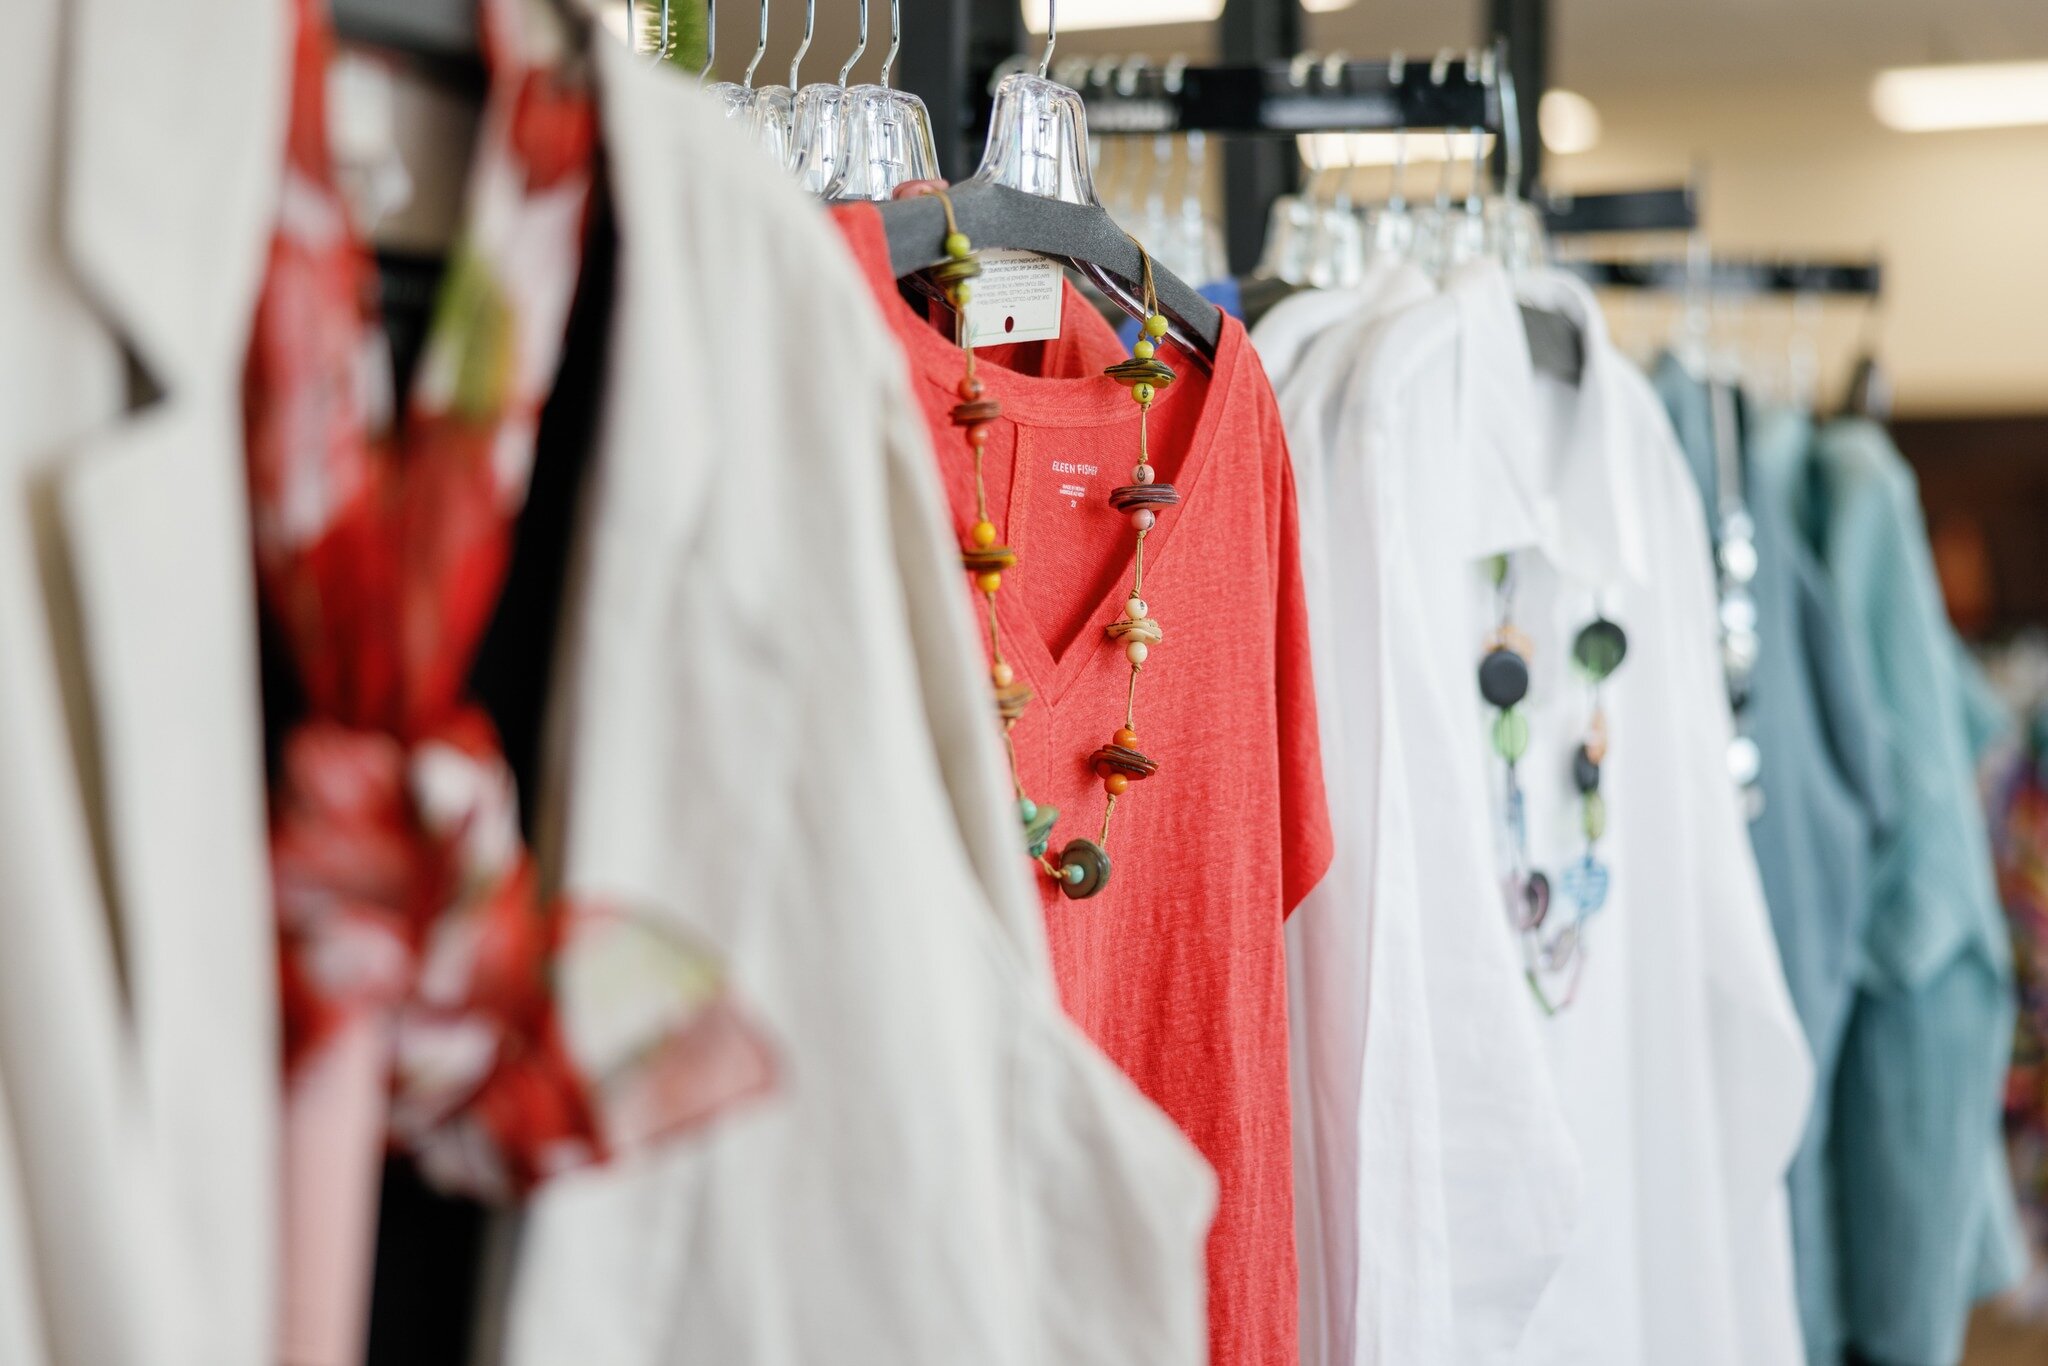 Spring has sprung at Portfolio! 🌼 

Come and see our latest arrivals, from bright florals to classic neutrals. We've got everything you need to refresh your wardrobe for the season. Stop by and let us help you find your new favorite pieces! 🛍️
.
#a